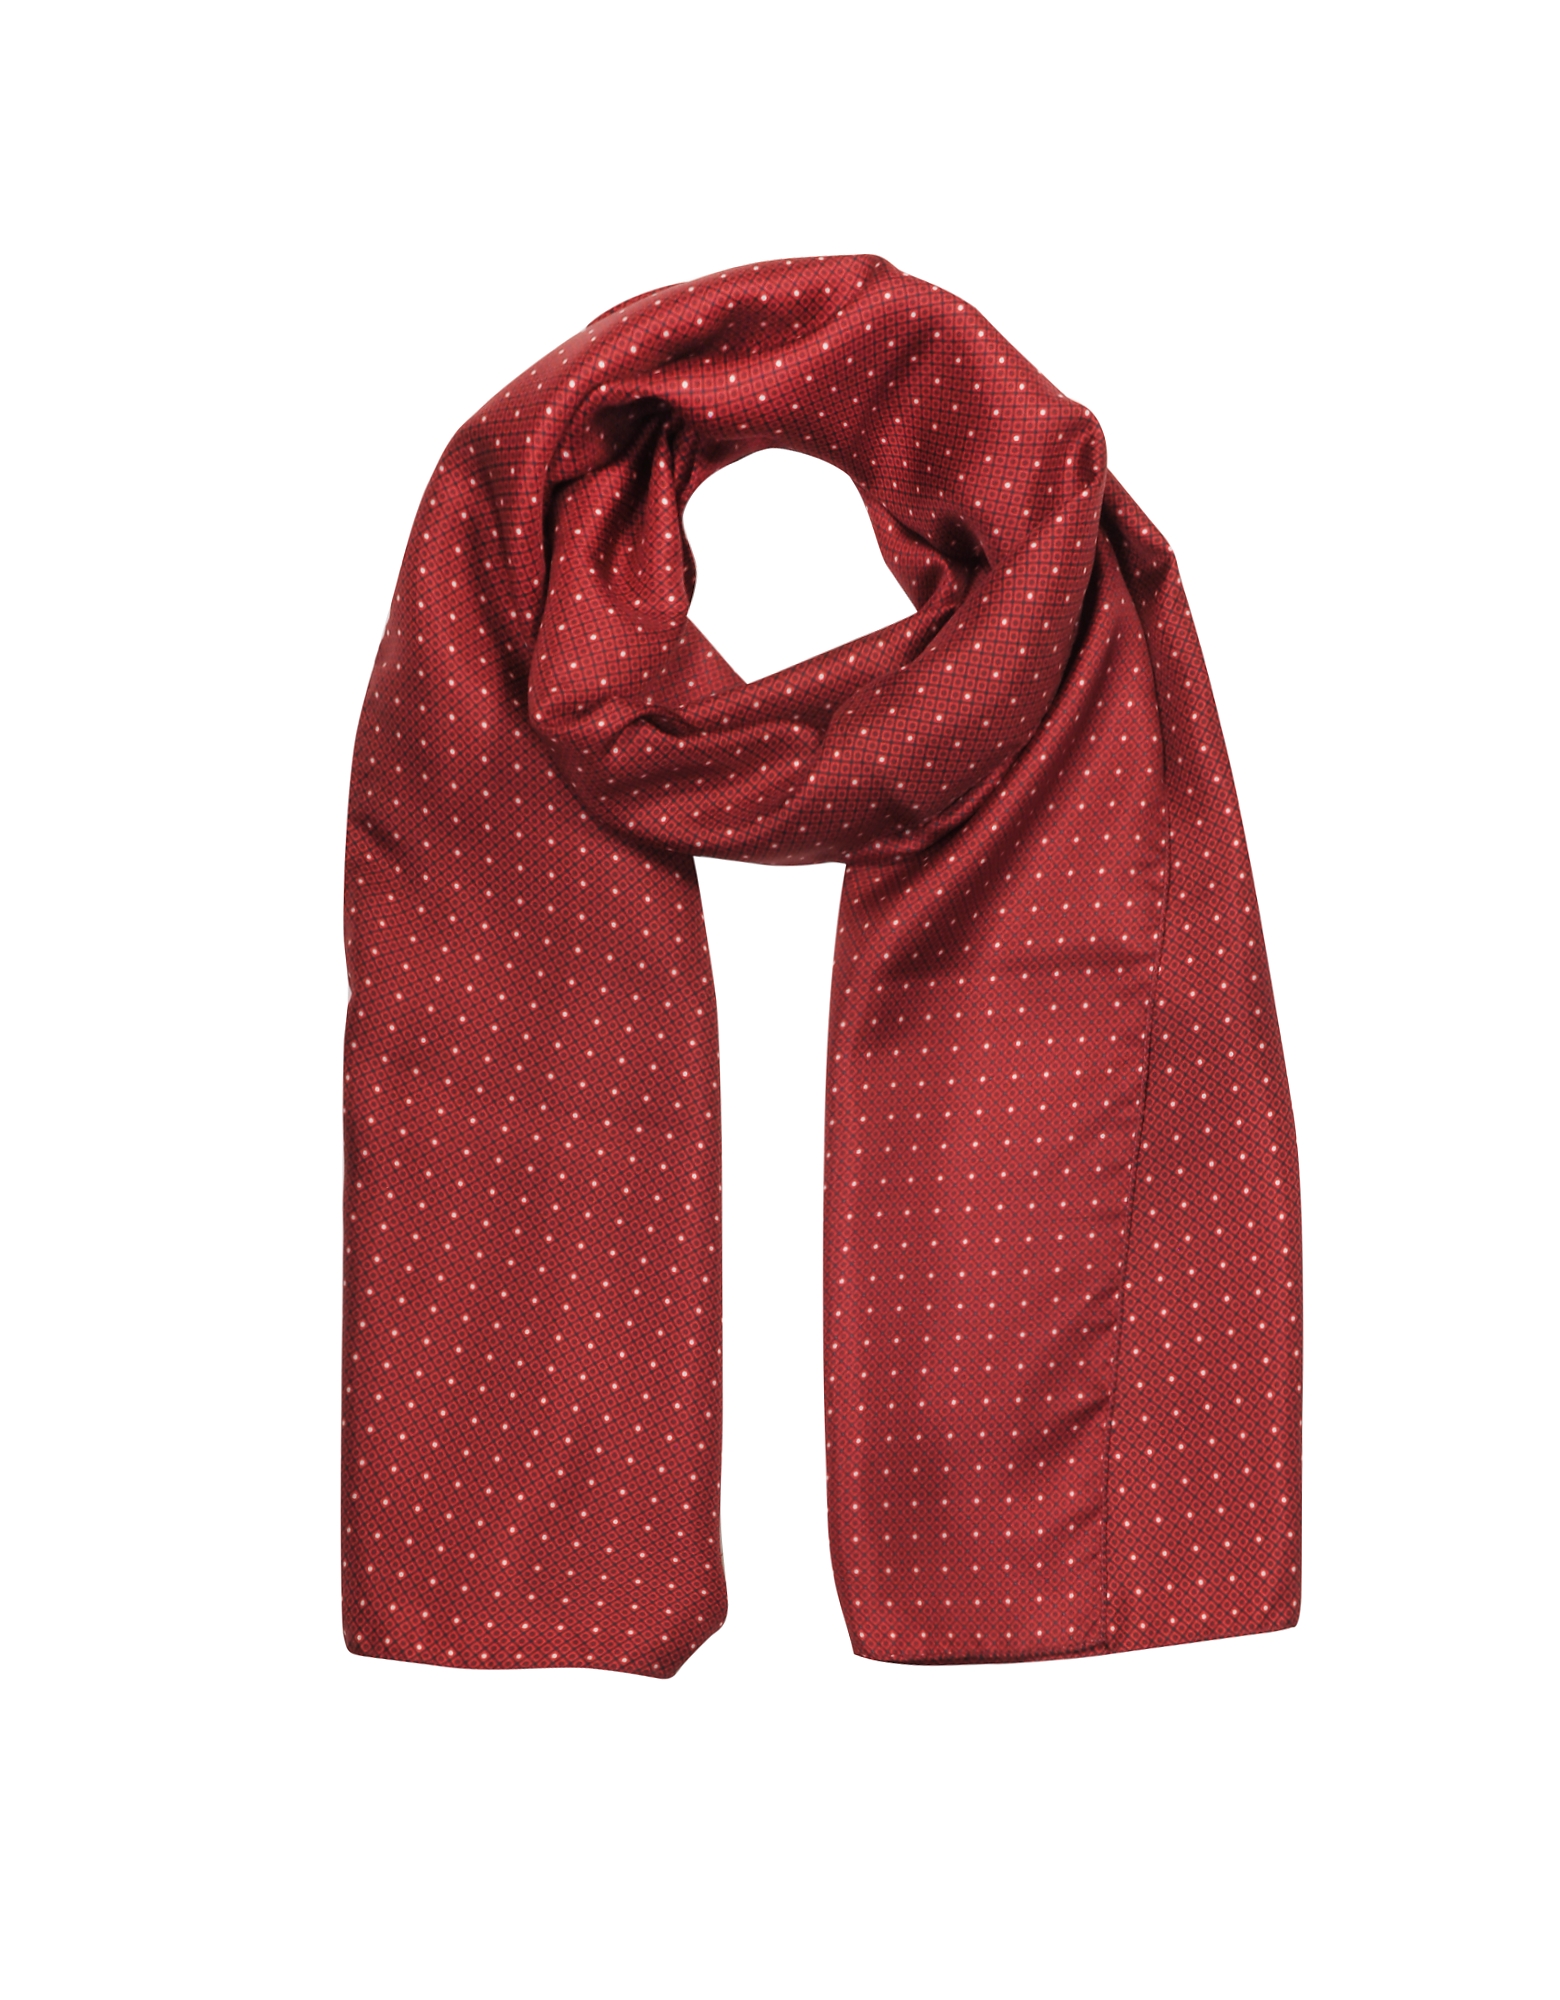 Red Dots Print Twill Silk Men's Scarf crafted in 100% silk, lends a sophisticated appeal and a color